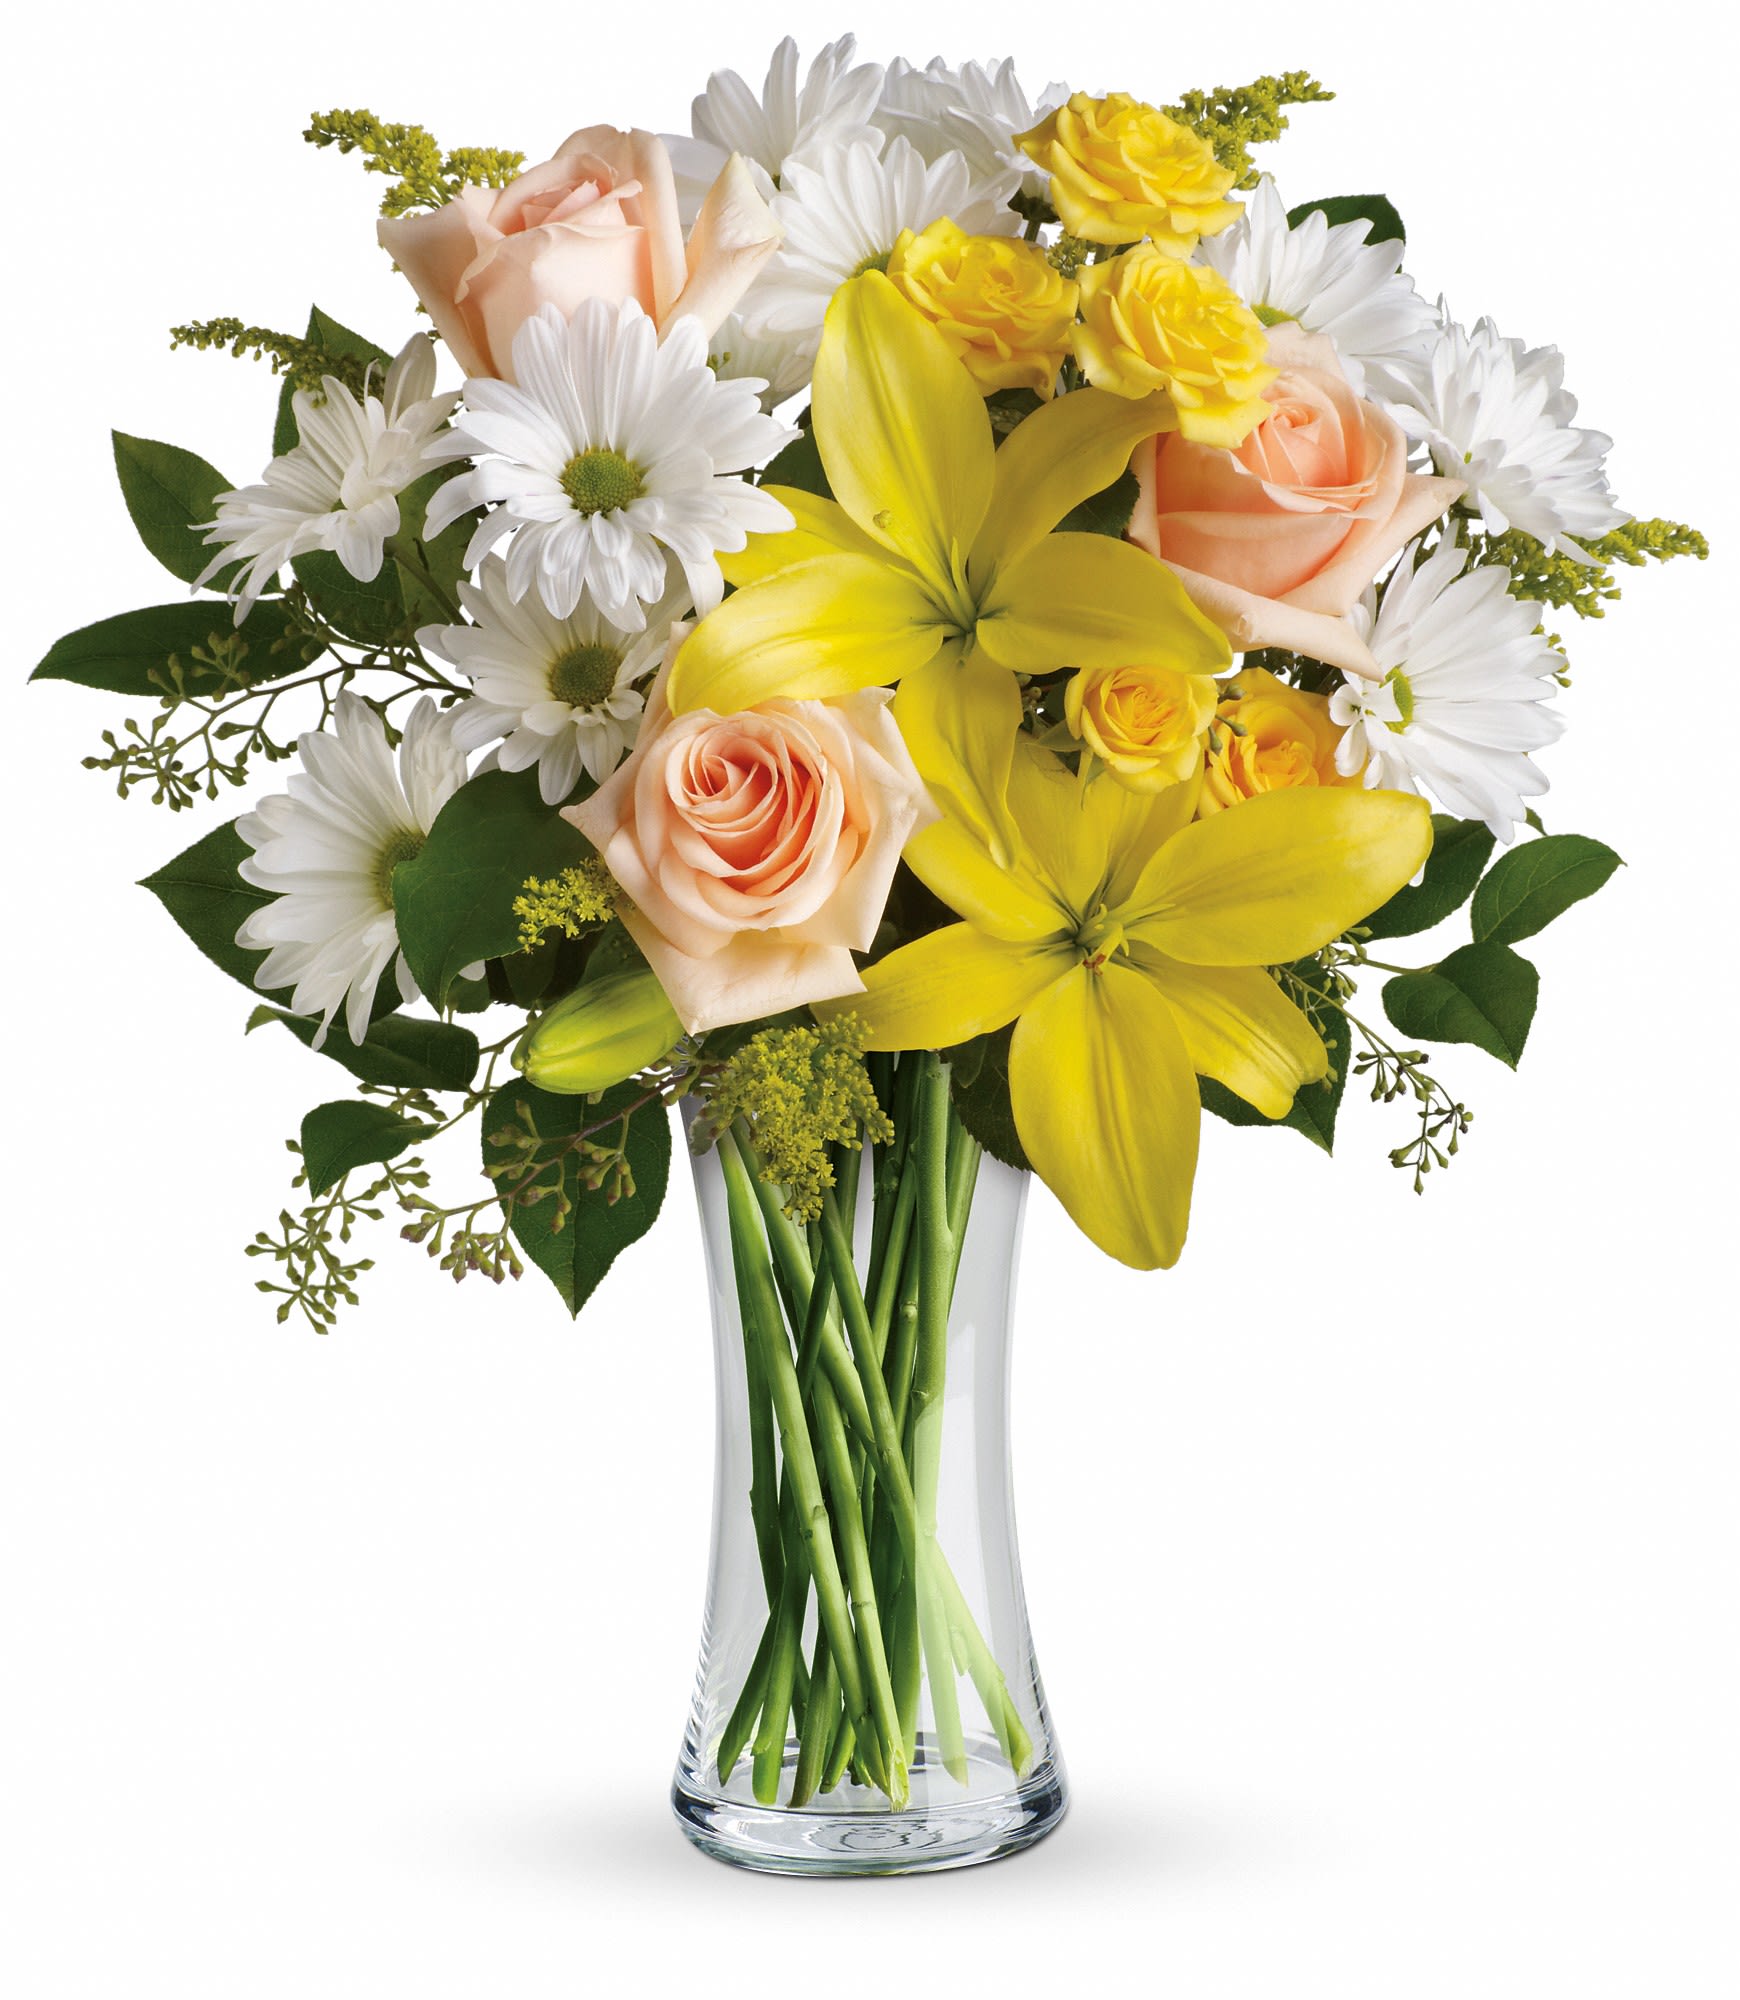 Daisies and Sunbeams - The song says, &quot;The sun'll come out tomorrow,&quot; but why not today? Whatever the weather, this sunny bouquet of yellow, peach and white flowers will brighten any day instantly. Perfect for a birthday, thank you or just because.